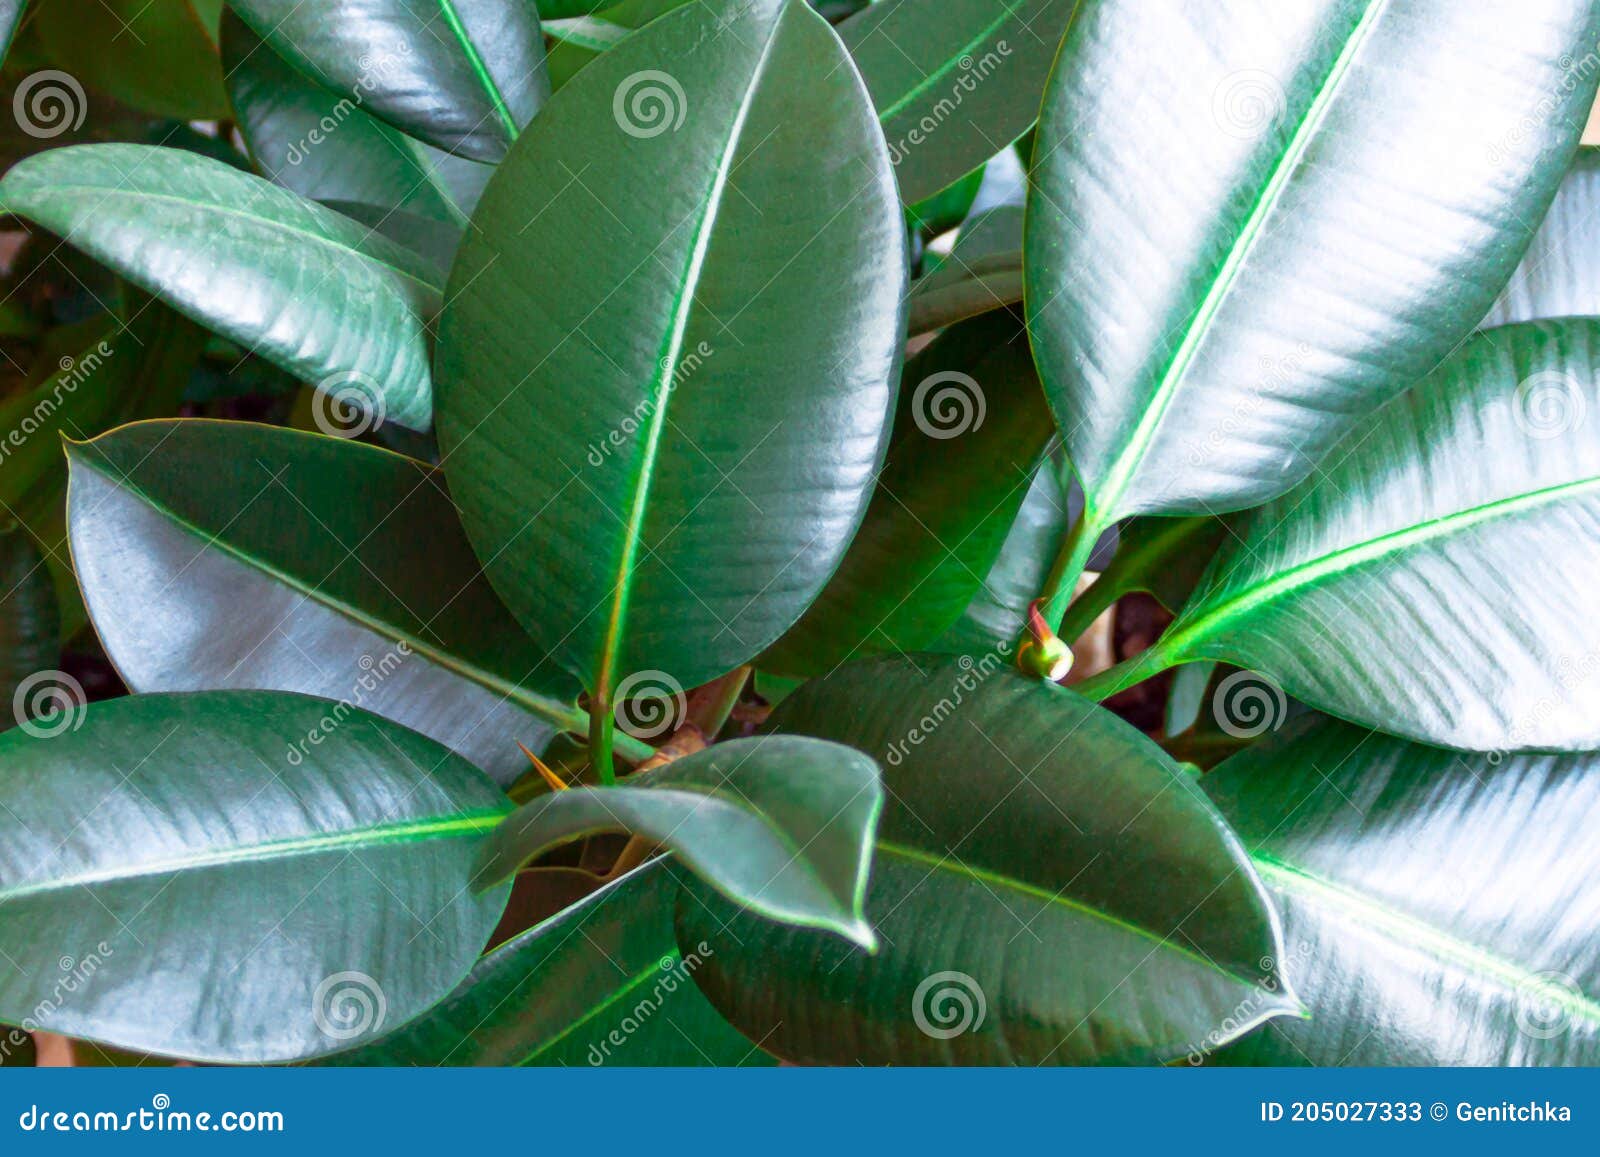 ficus robusta elastica rubber fig, indian rubber houseplant green leaves abstract background